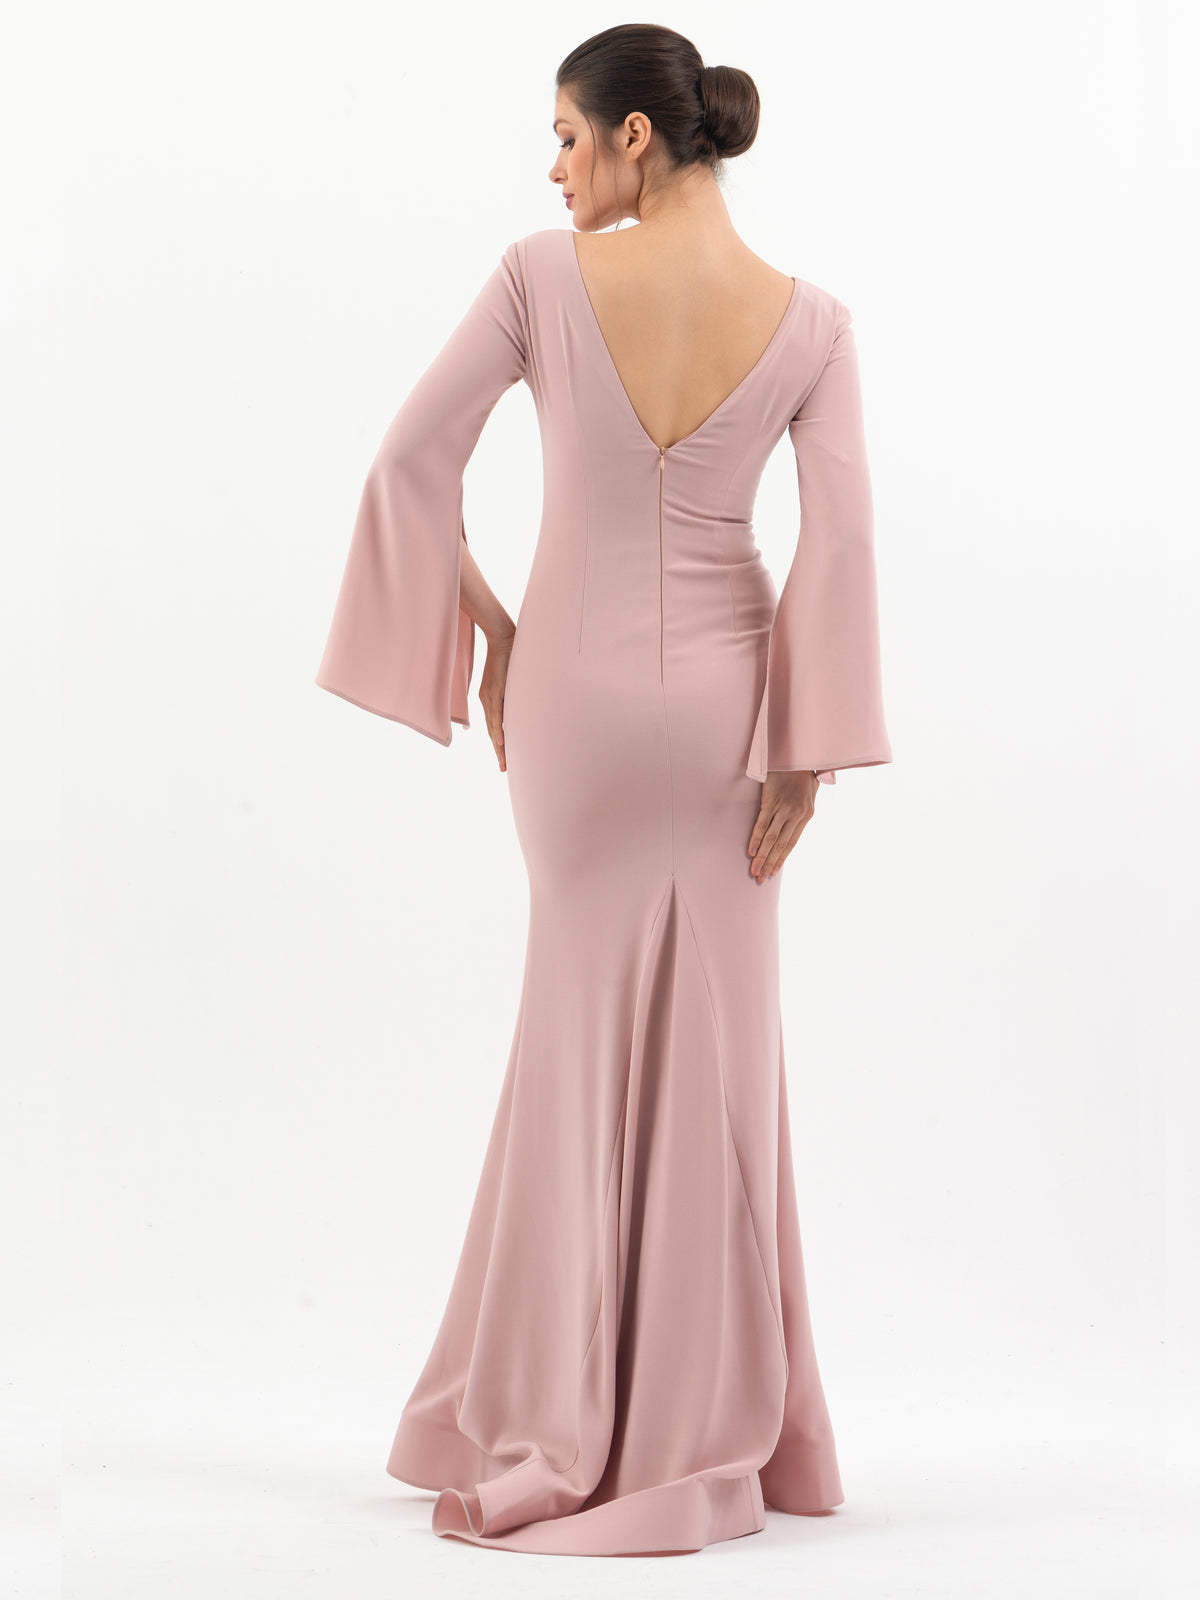 Celestial Charm: Crepe Fabric Gown with Bell Sleeves for an Ethereal and Enchanting Vibe